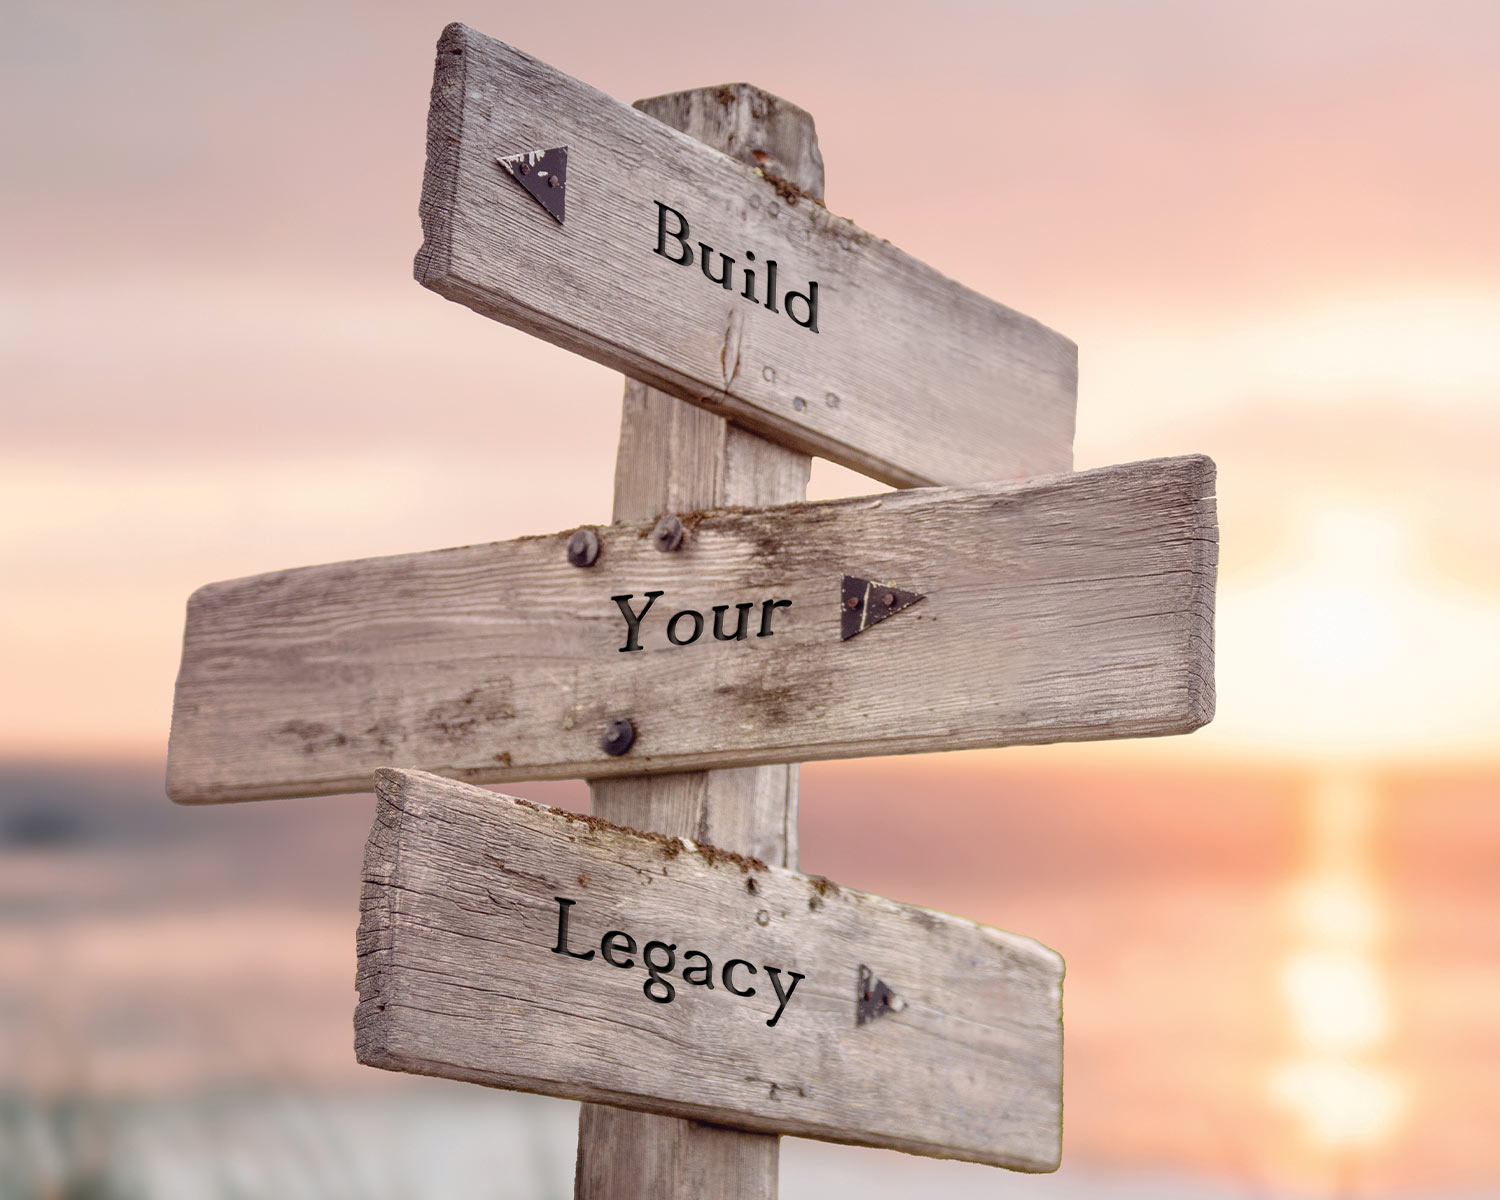 a wooden directional sign with three board reading "Build", "Your", and "Legacy"